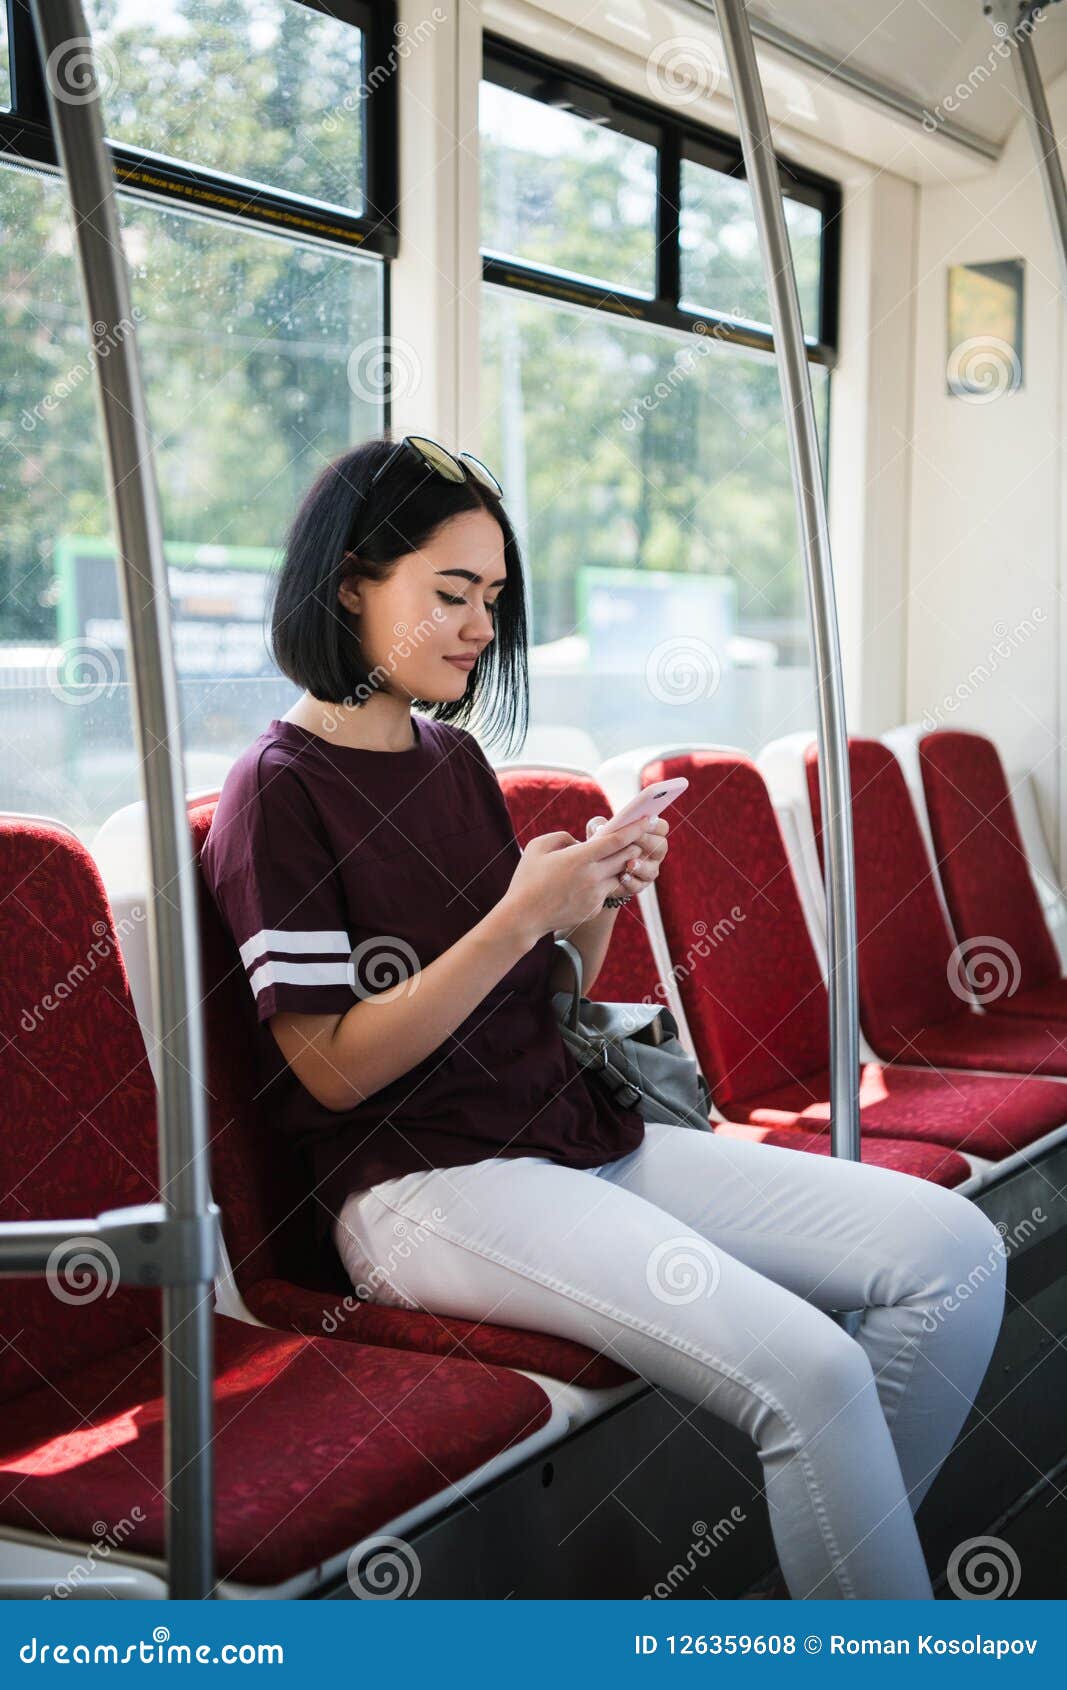 Man Dropped The Phone In The Toilet Stock Photo - Image of 